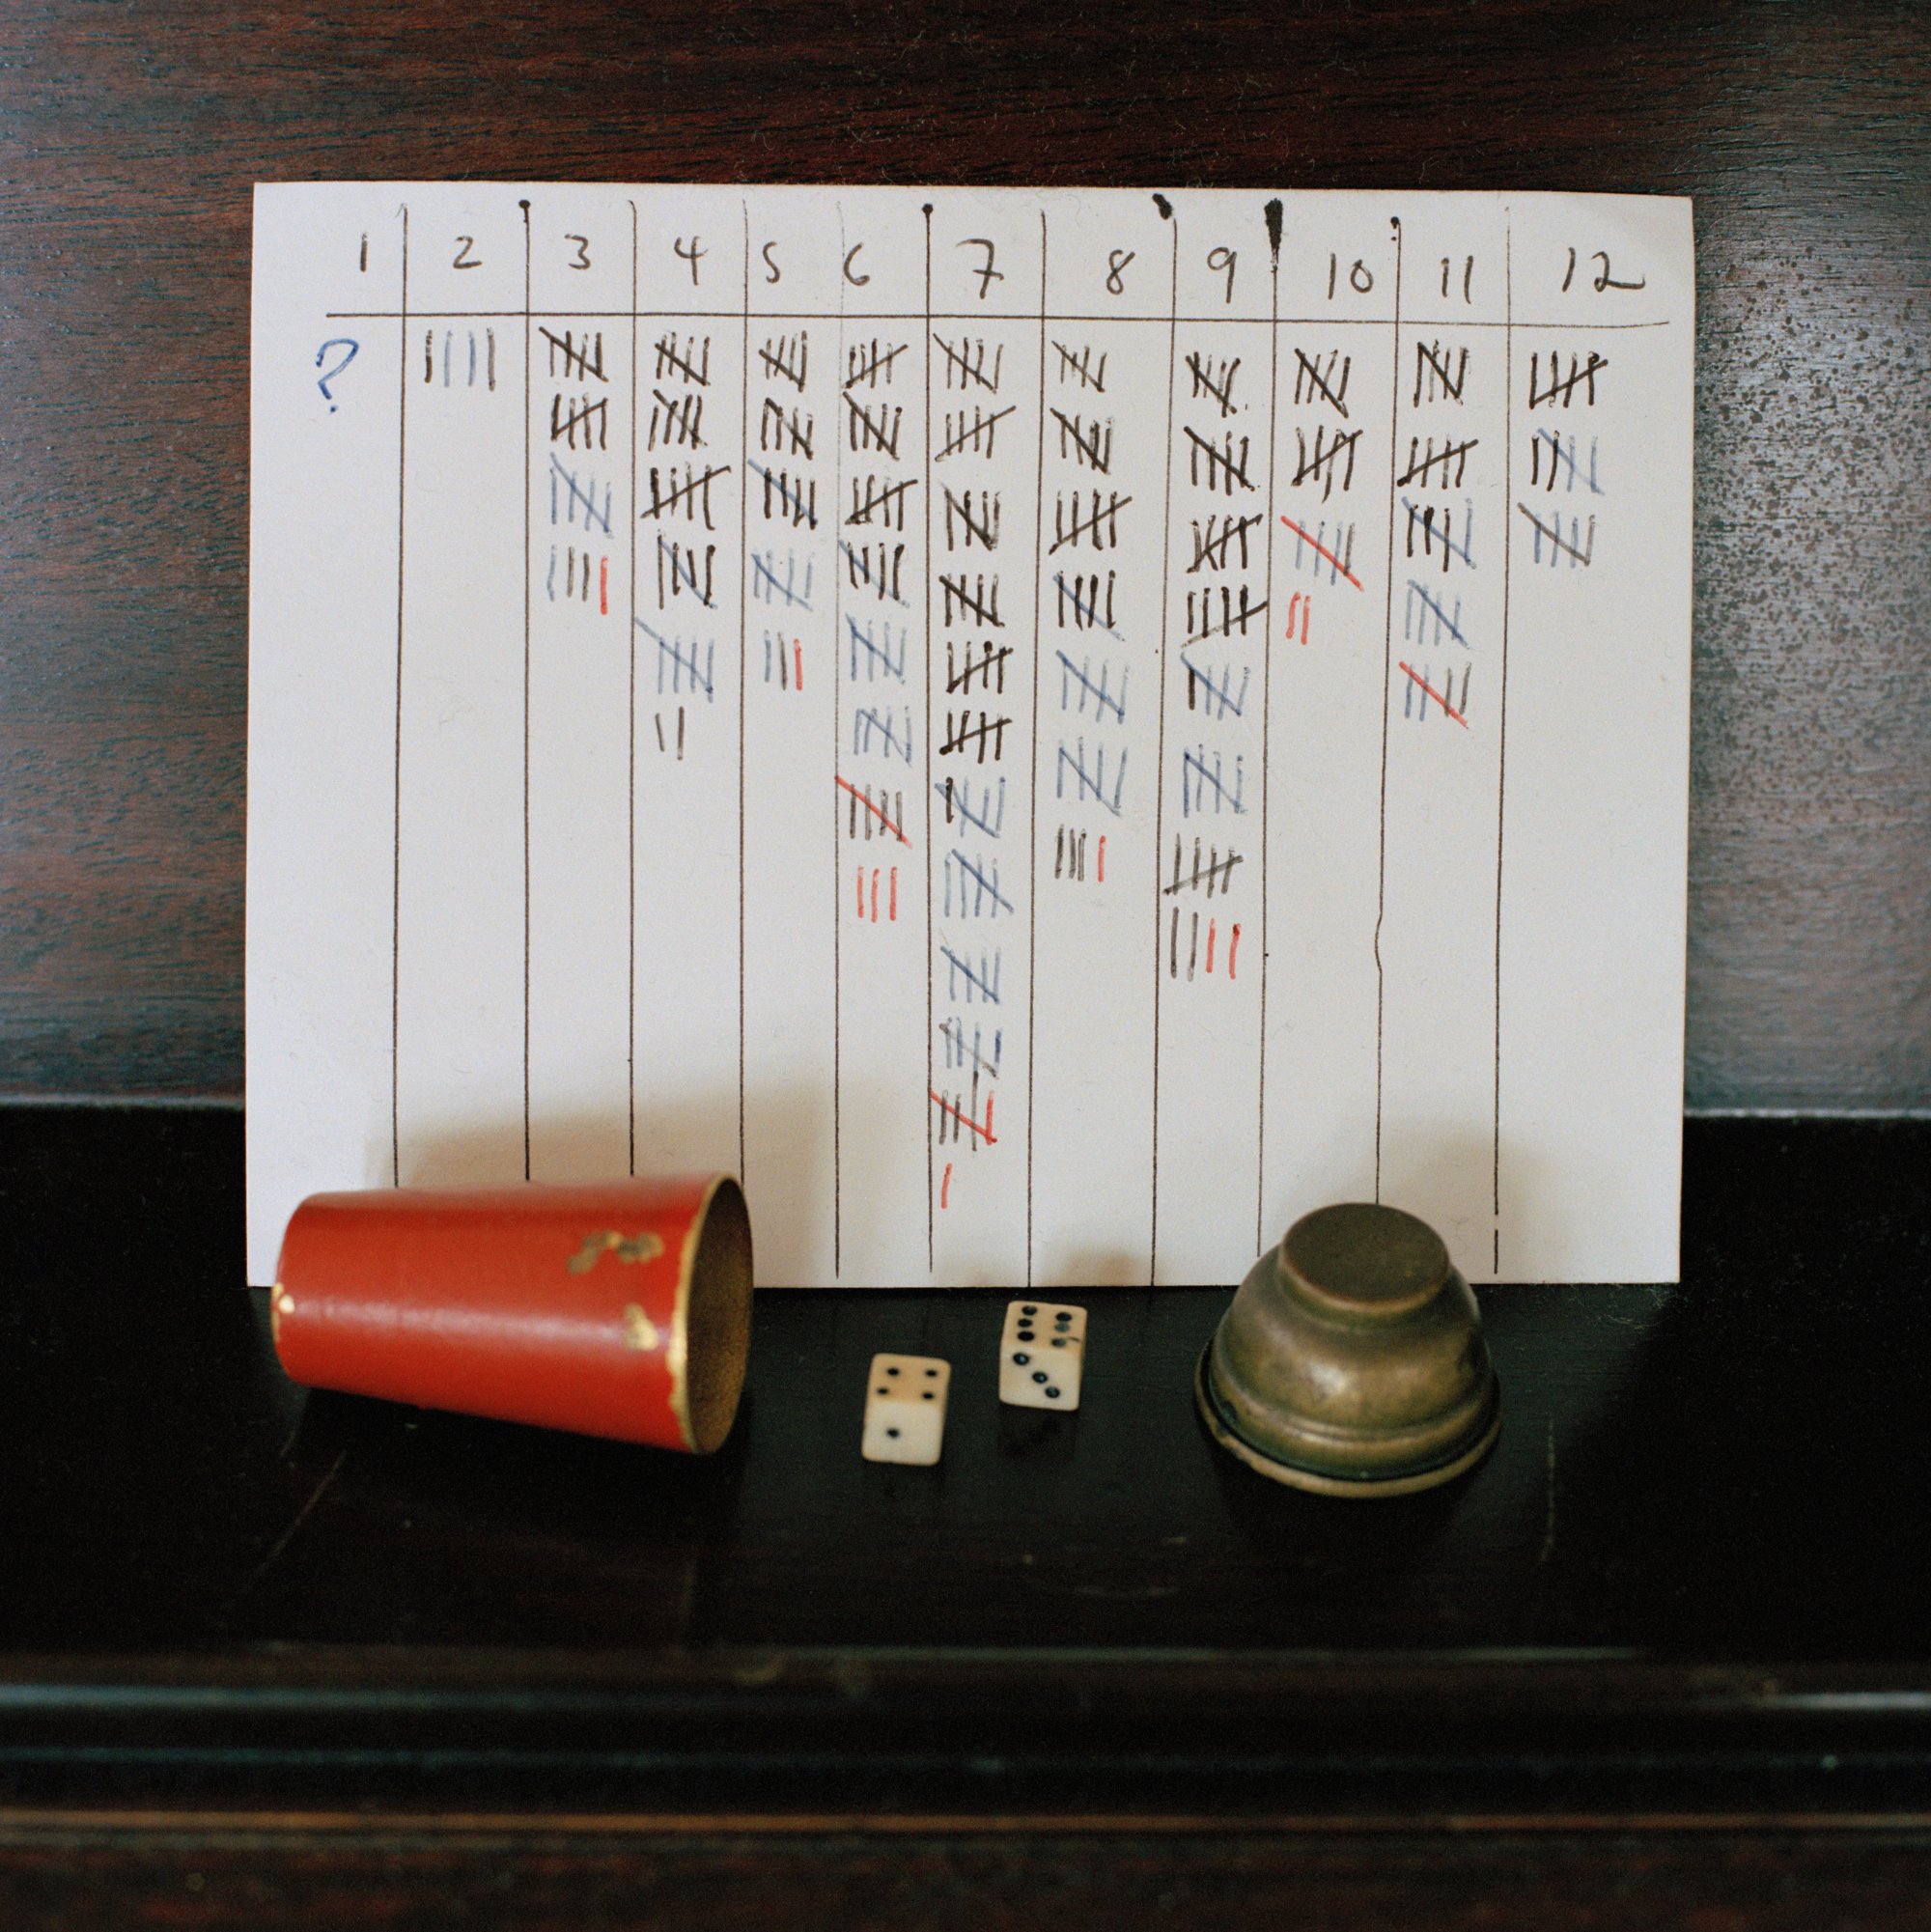 A dice cup and two hand-dotted dice and a tiny up-turned brass vessel, resting in front of a card with columns numbered 1 through 12 and tallies scrawled in each column in various colors of ink, resulting in a normal distribution of tallies centered at 7 and no tallies but a question mark under column 1.